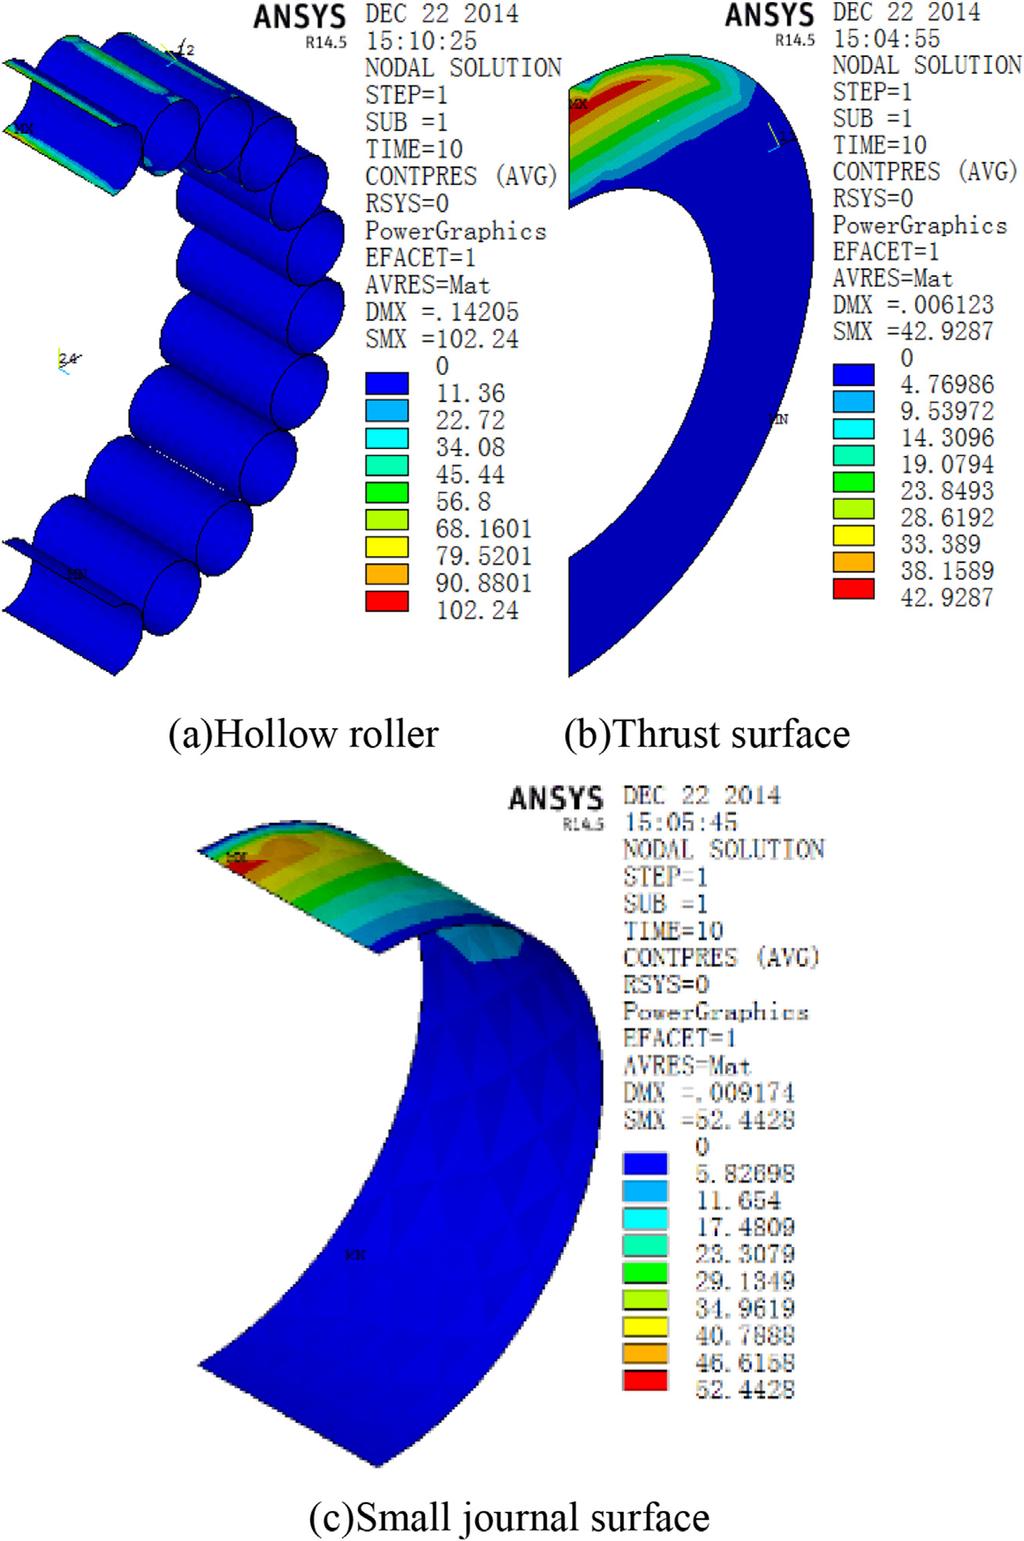 392 C. Han et al. / Petroleum 1 (2015) 388e396 Fig. 4. Contact stress of the hollow cylindrical bearing.